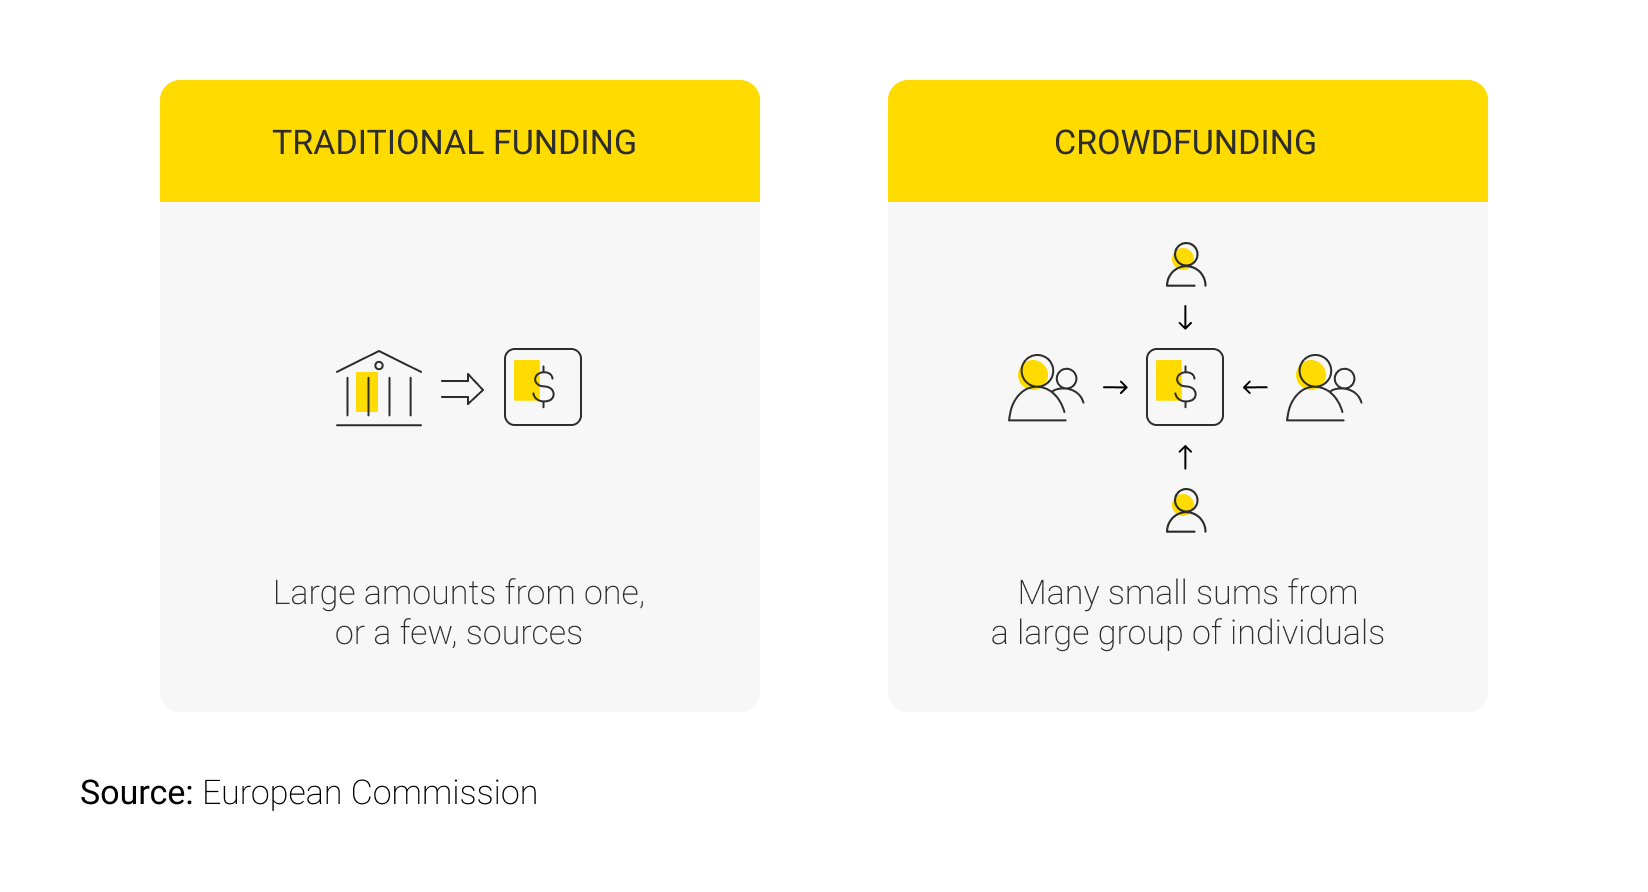 How does crowdfunding work?